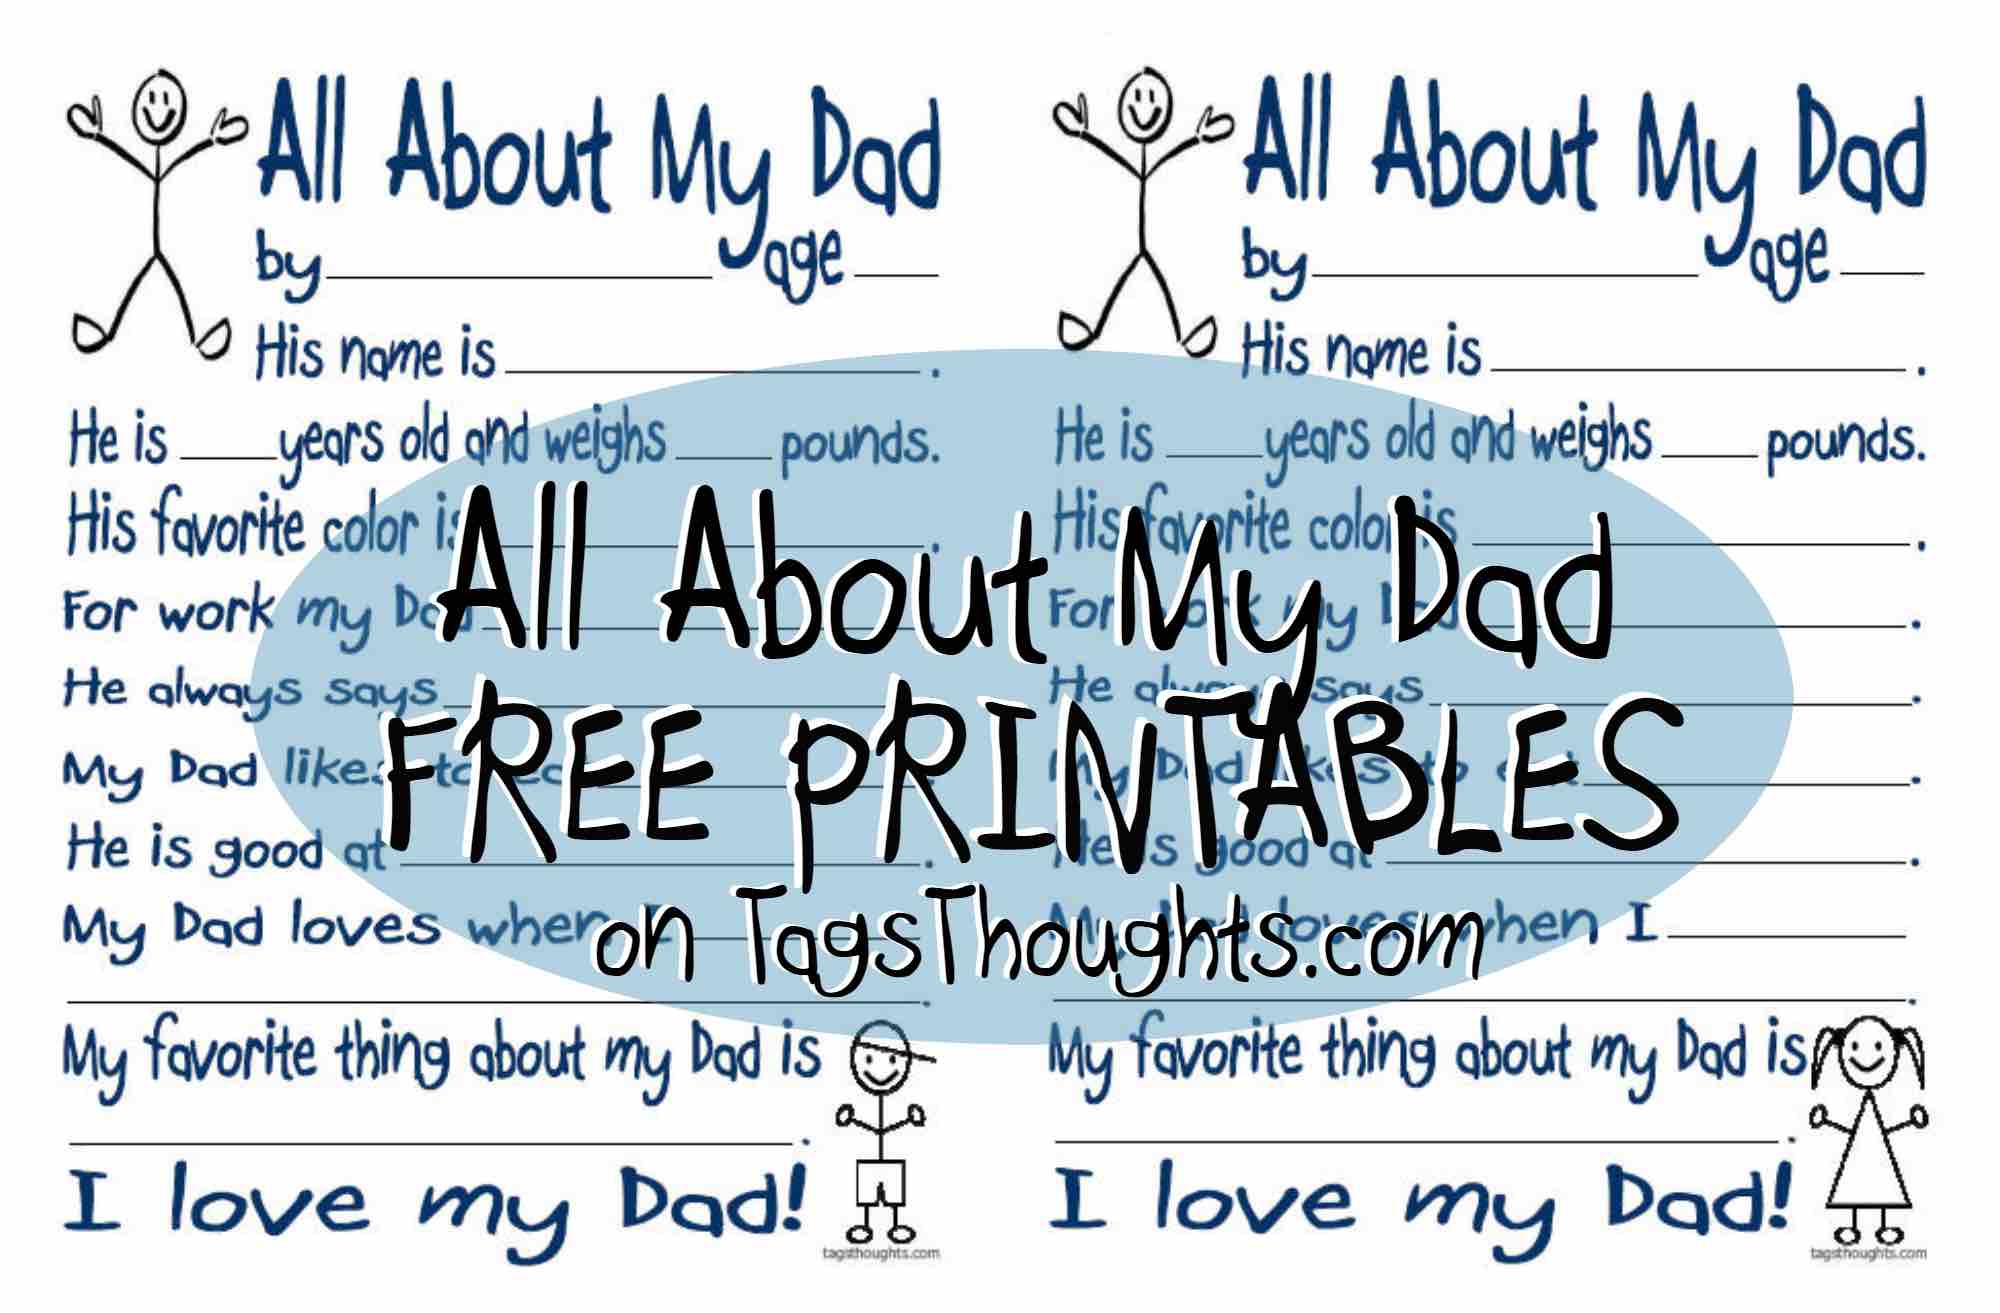 All About My Dad; Free Printable for Father's Day by trishsutton.com